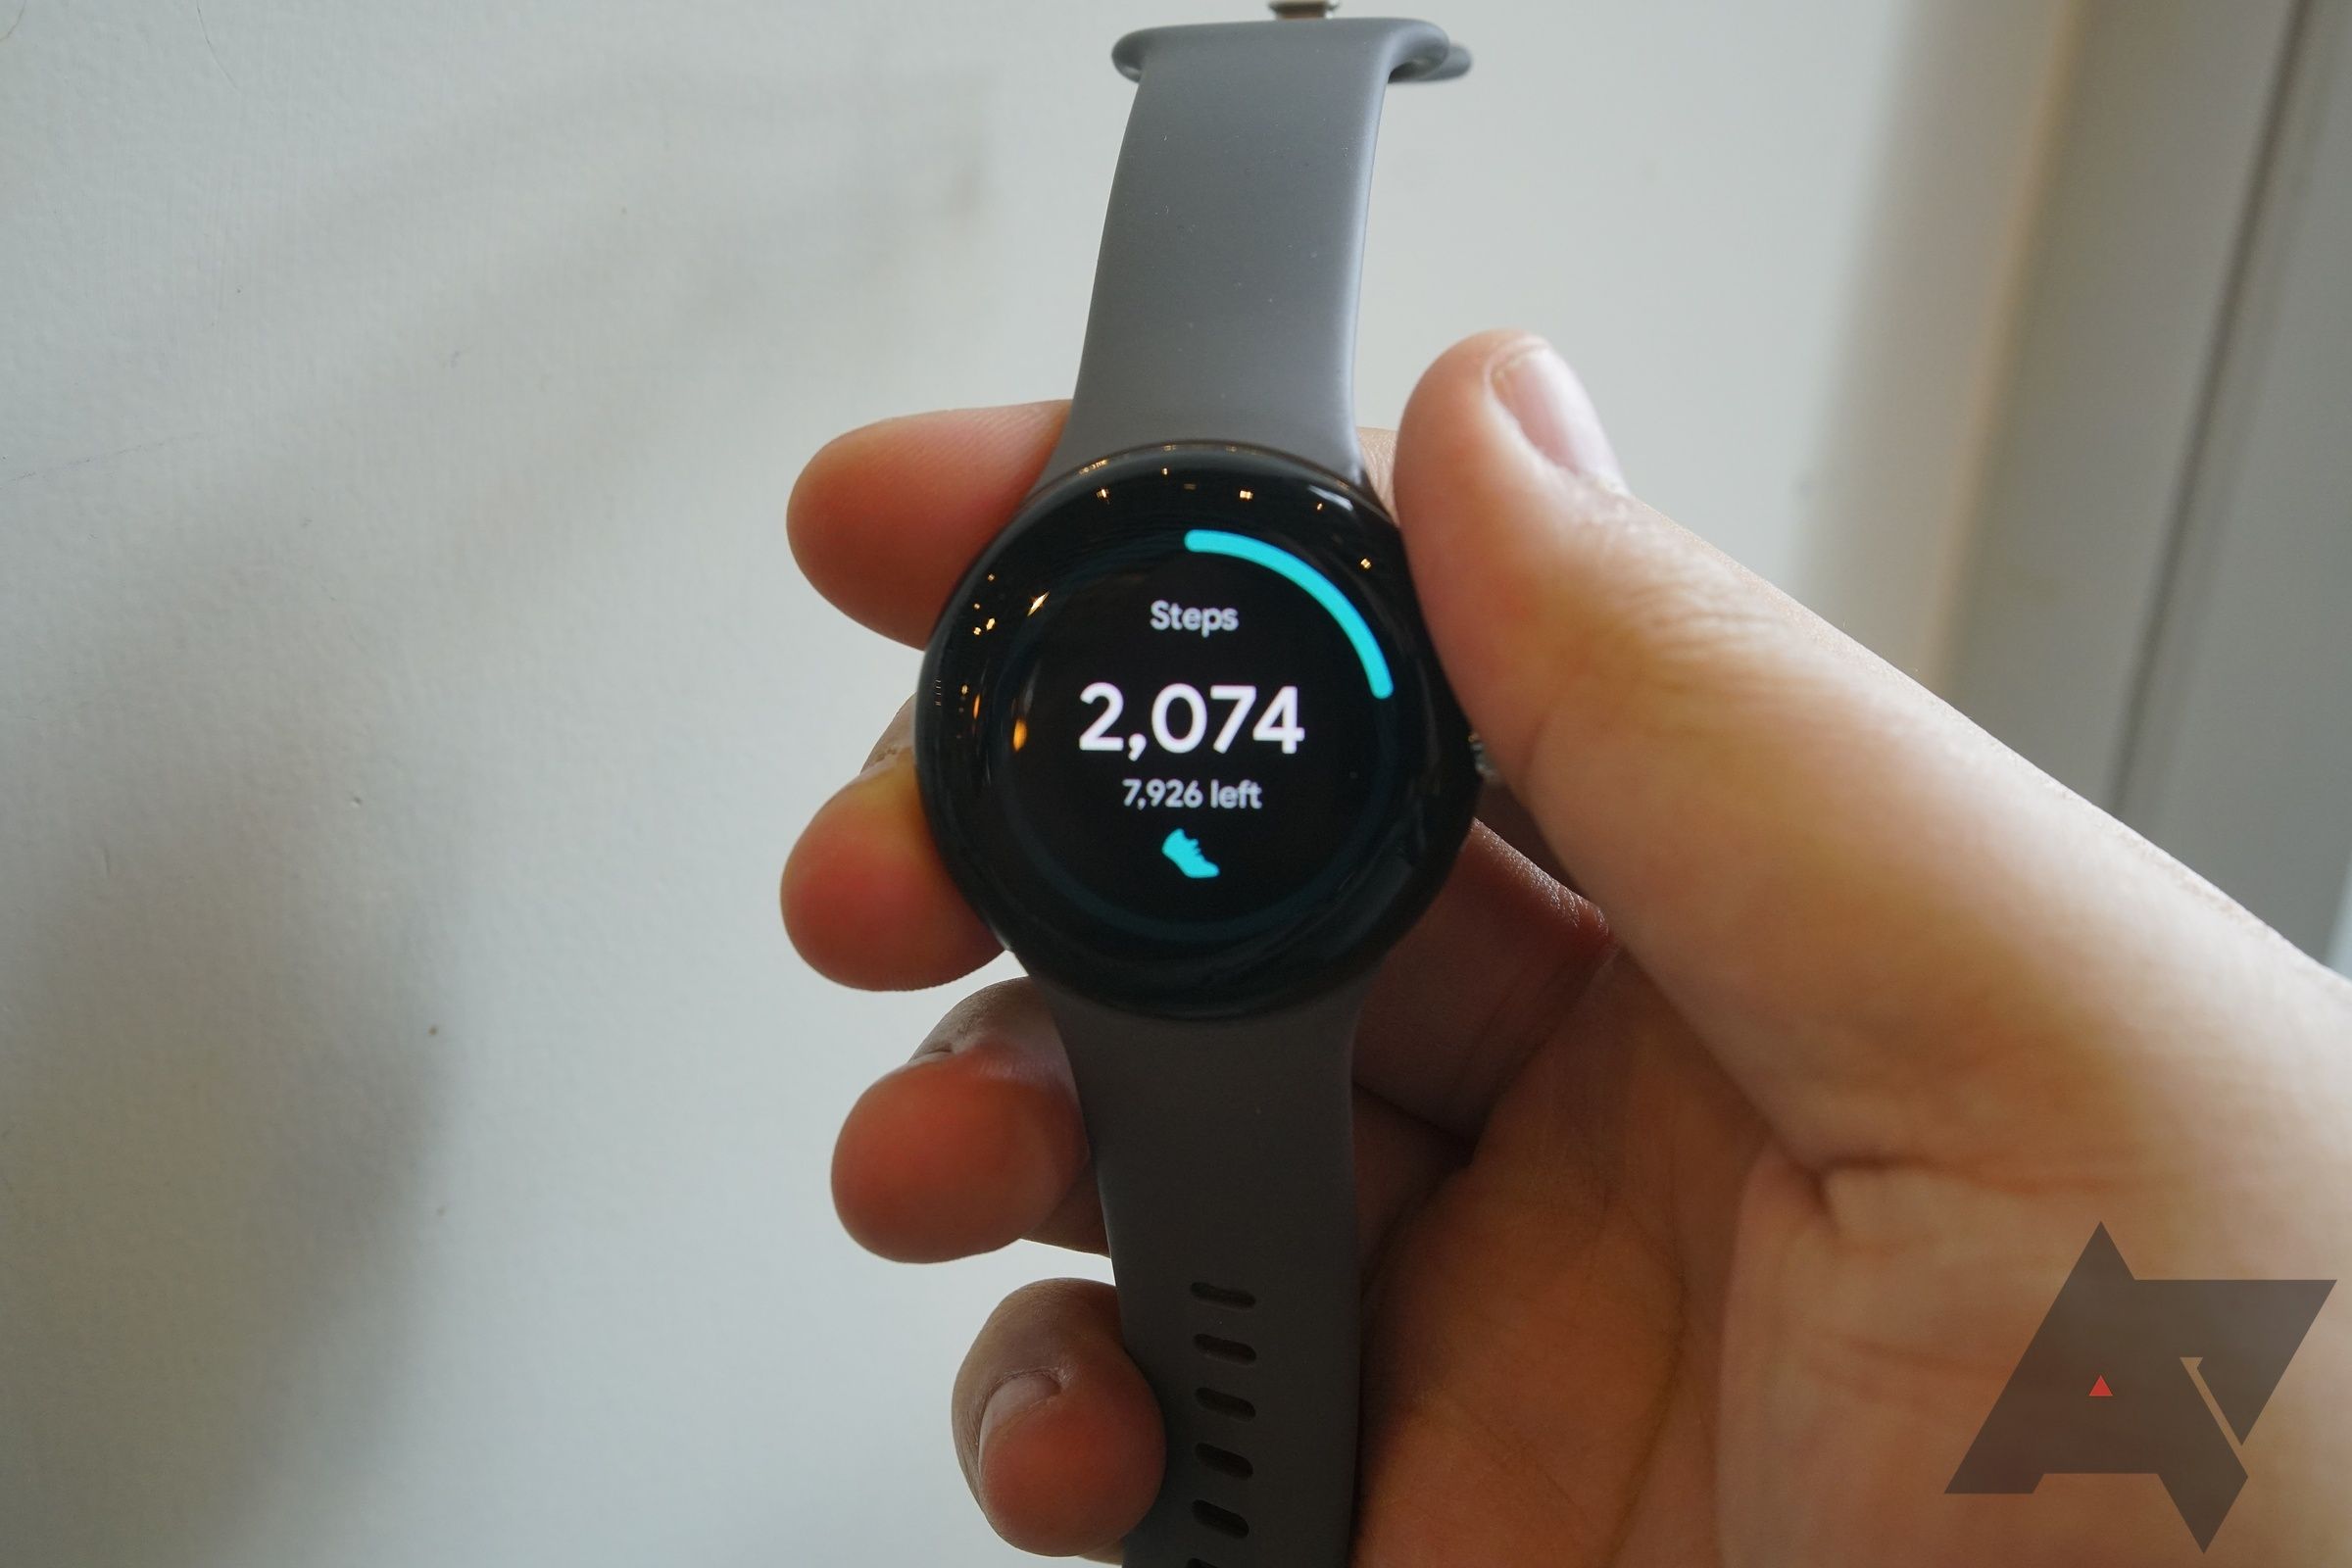 A hand holding a Google Pixel Watch showing the steps taken by the wearer